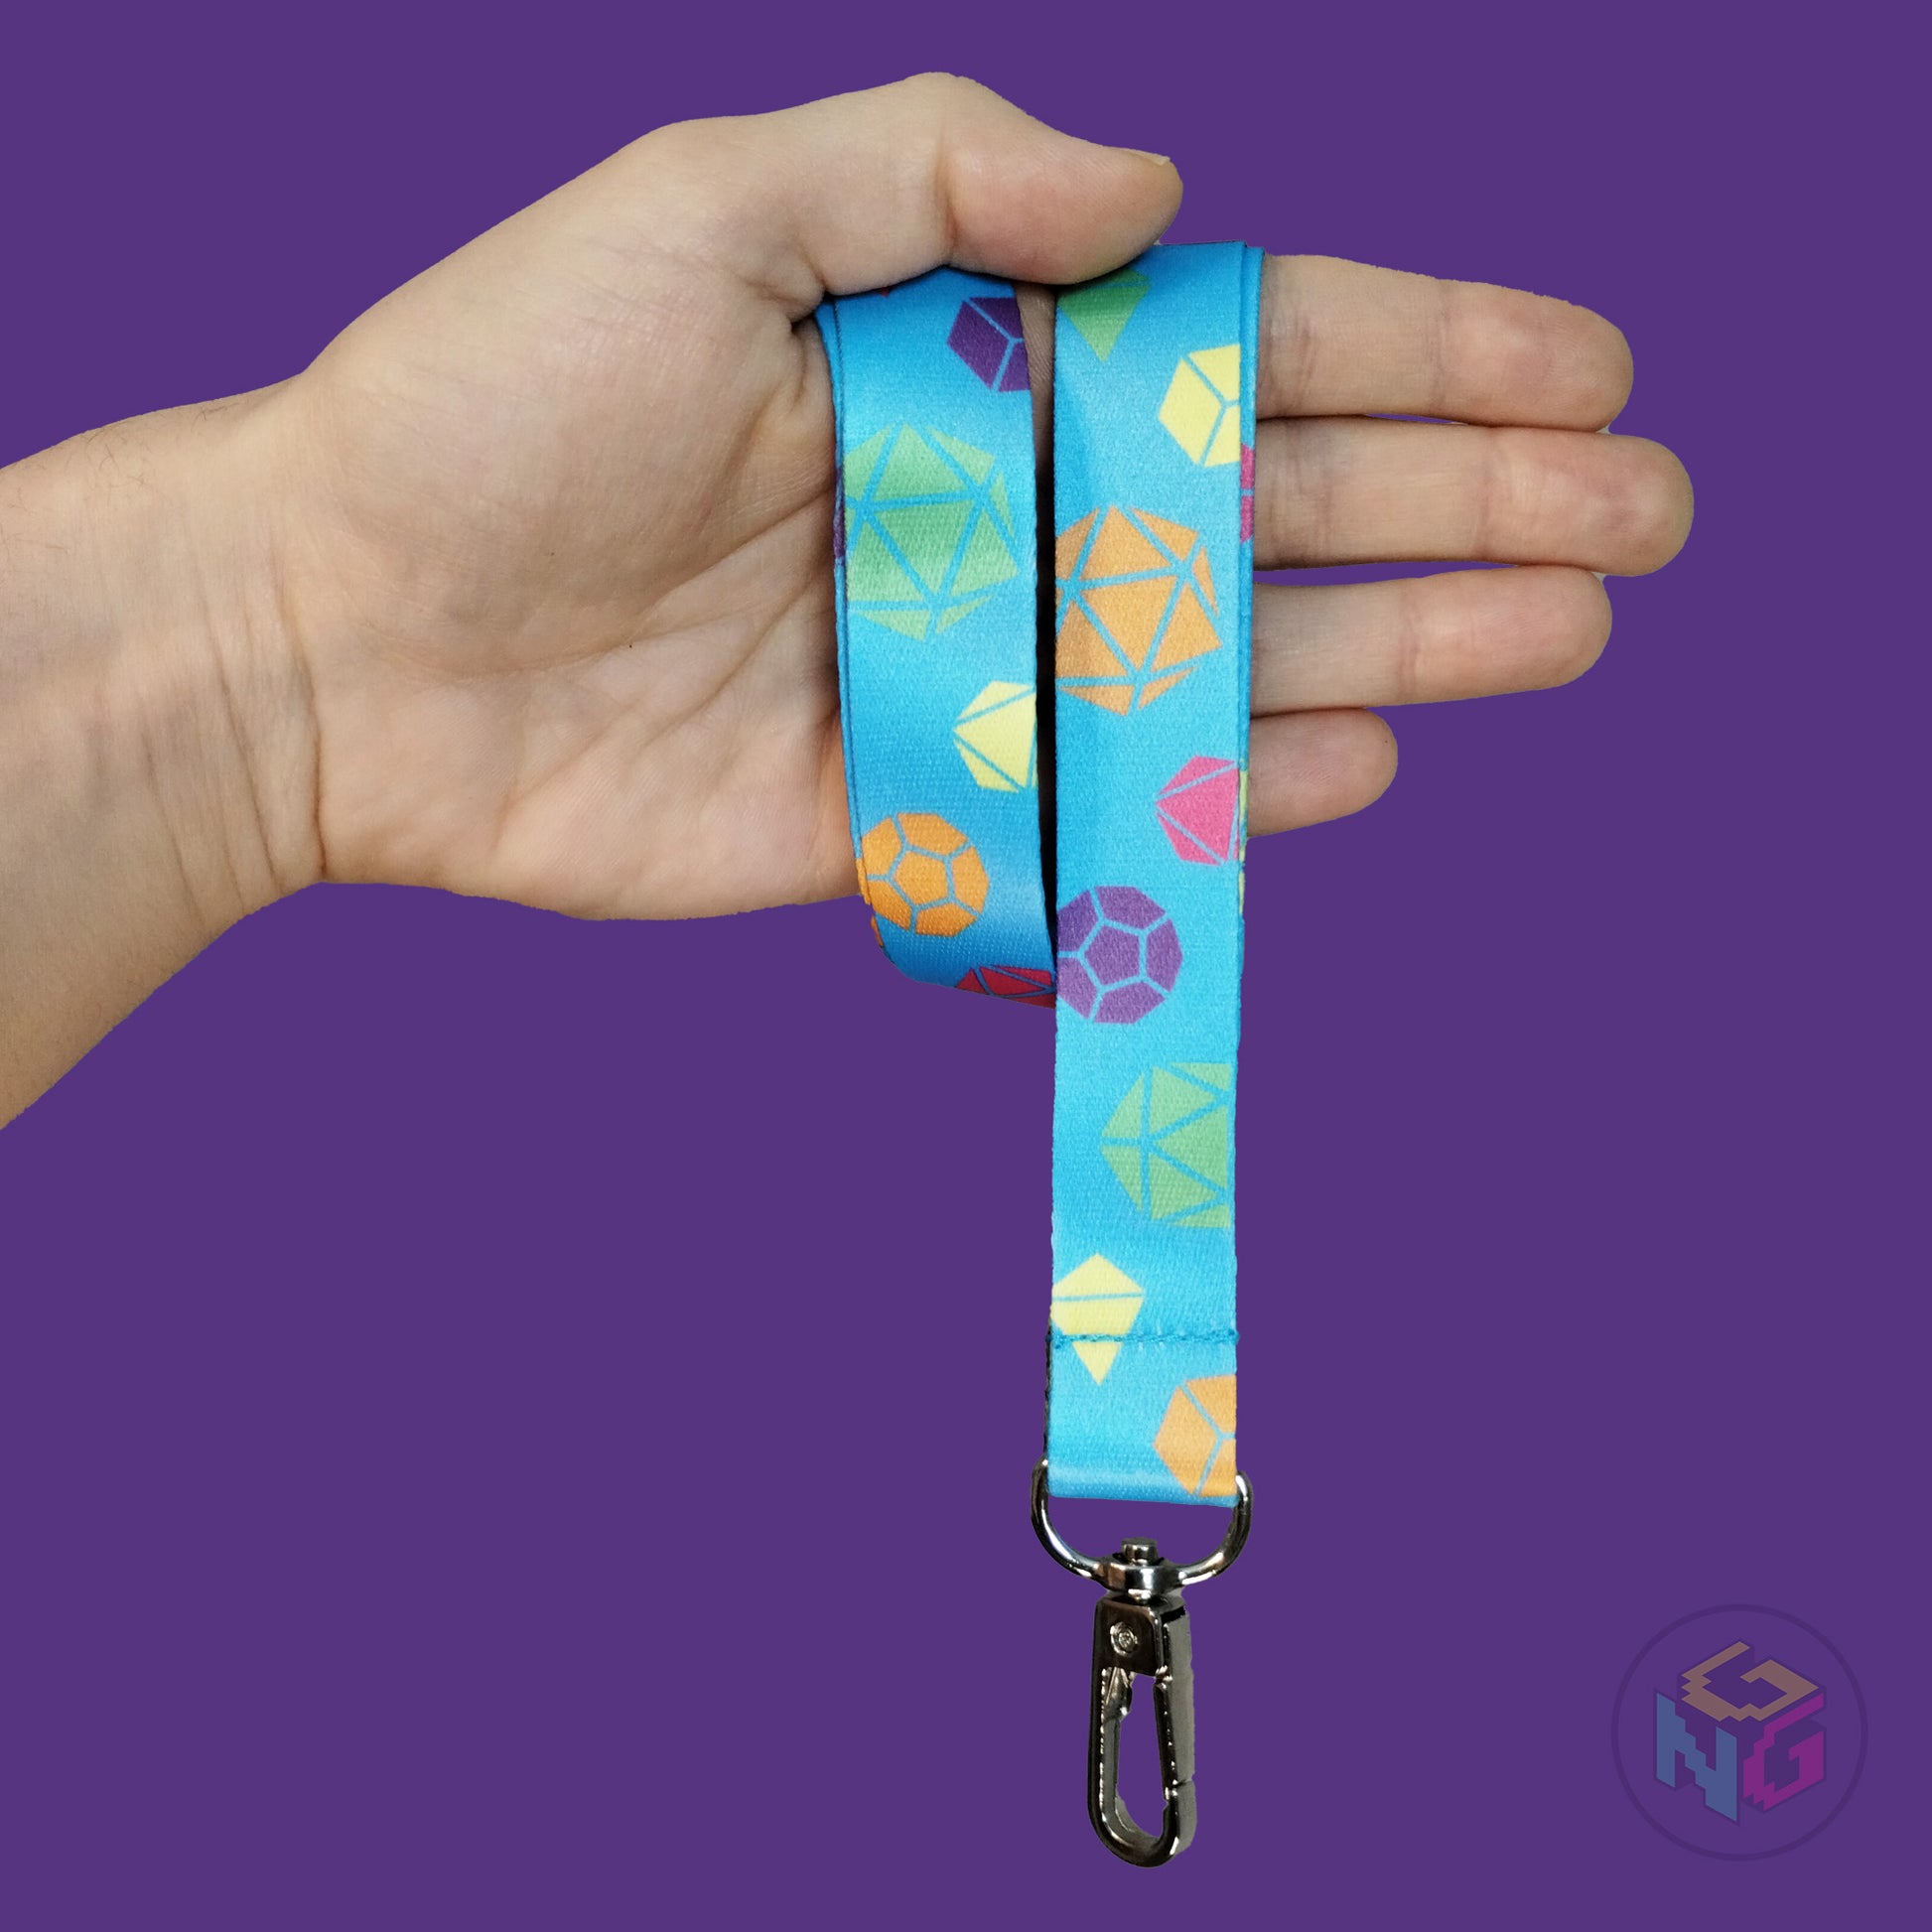 blue rainbow dice lanyard wrapped around a hand with the lobster clasp dangling against a purple background